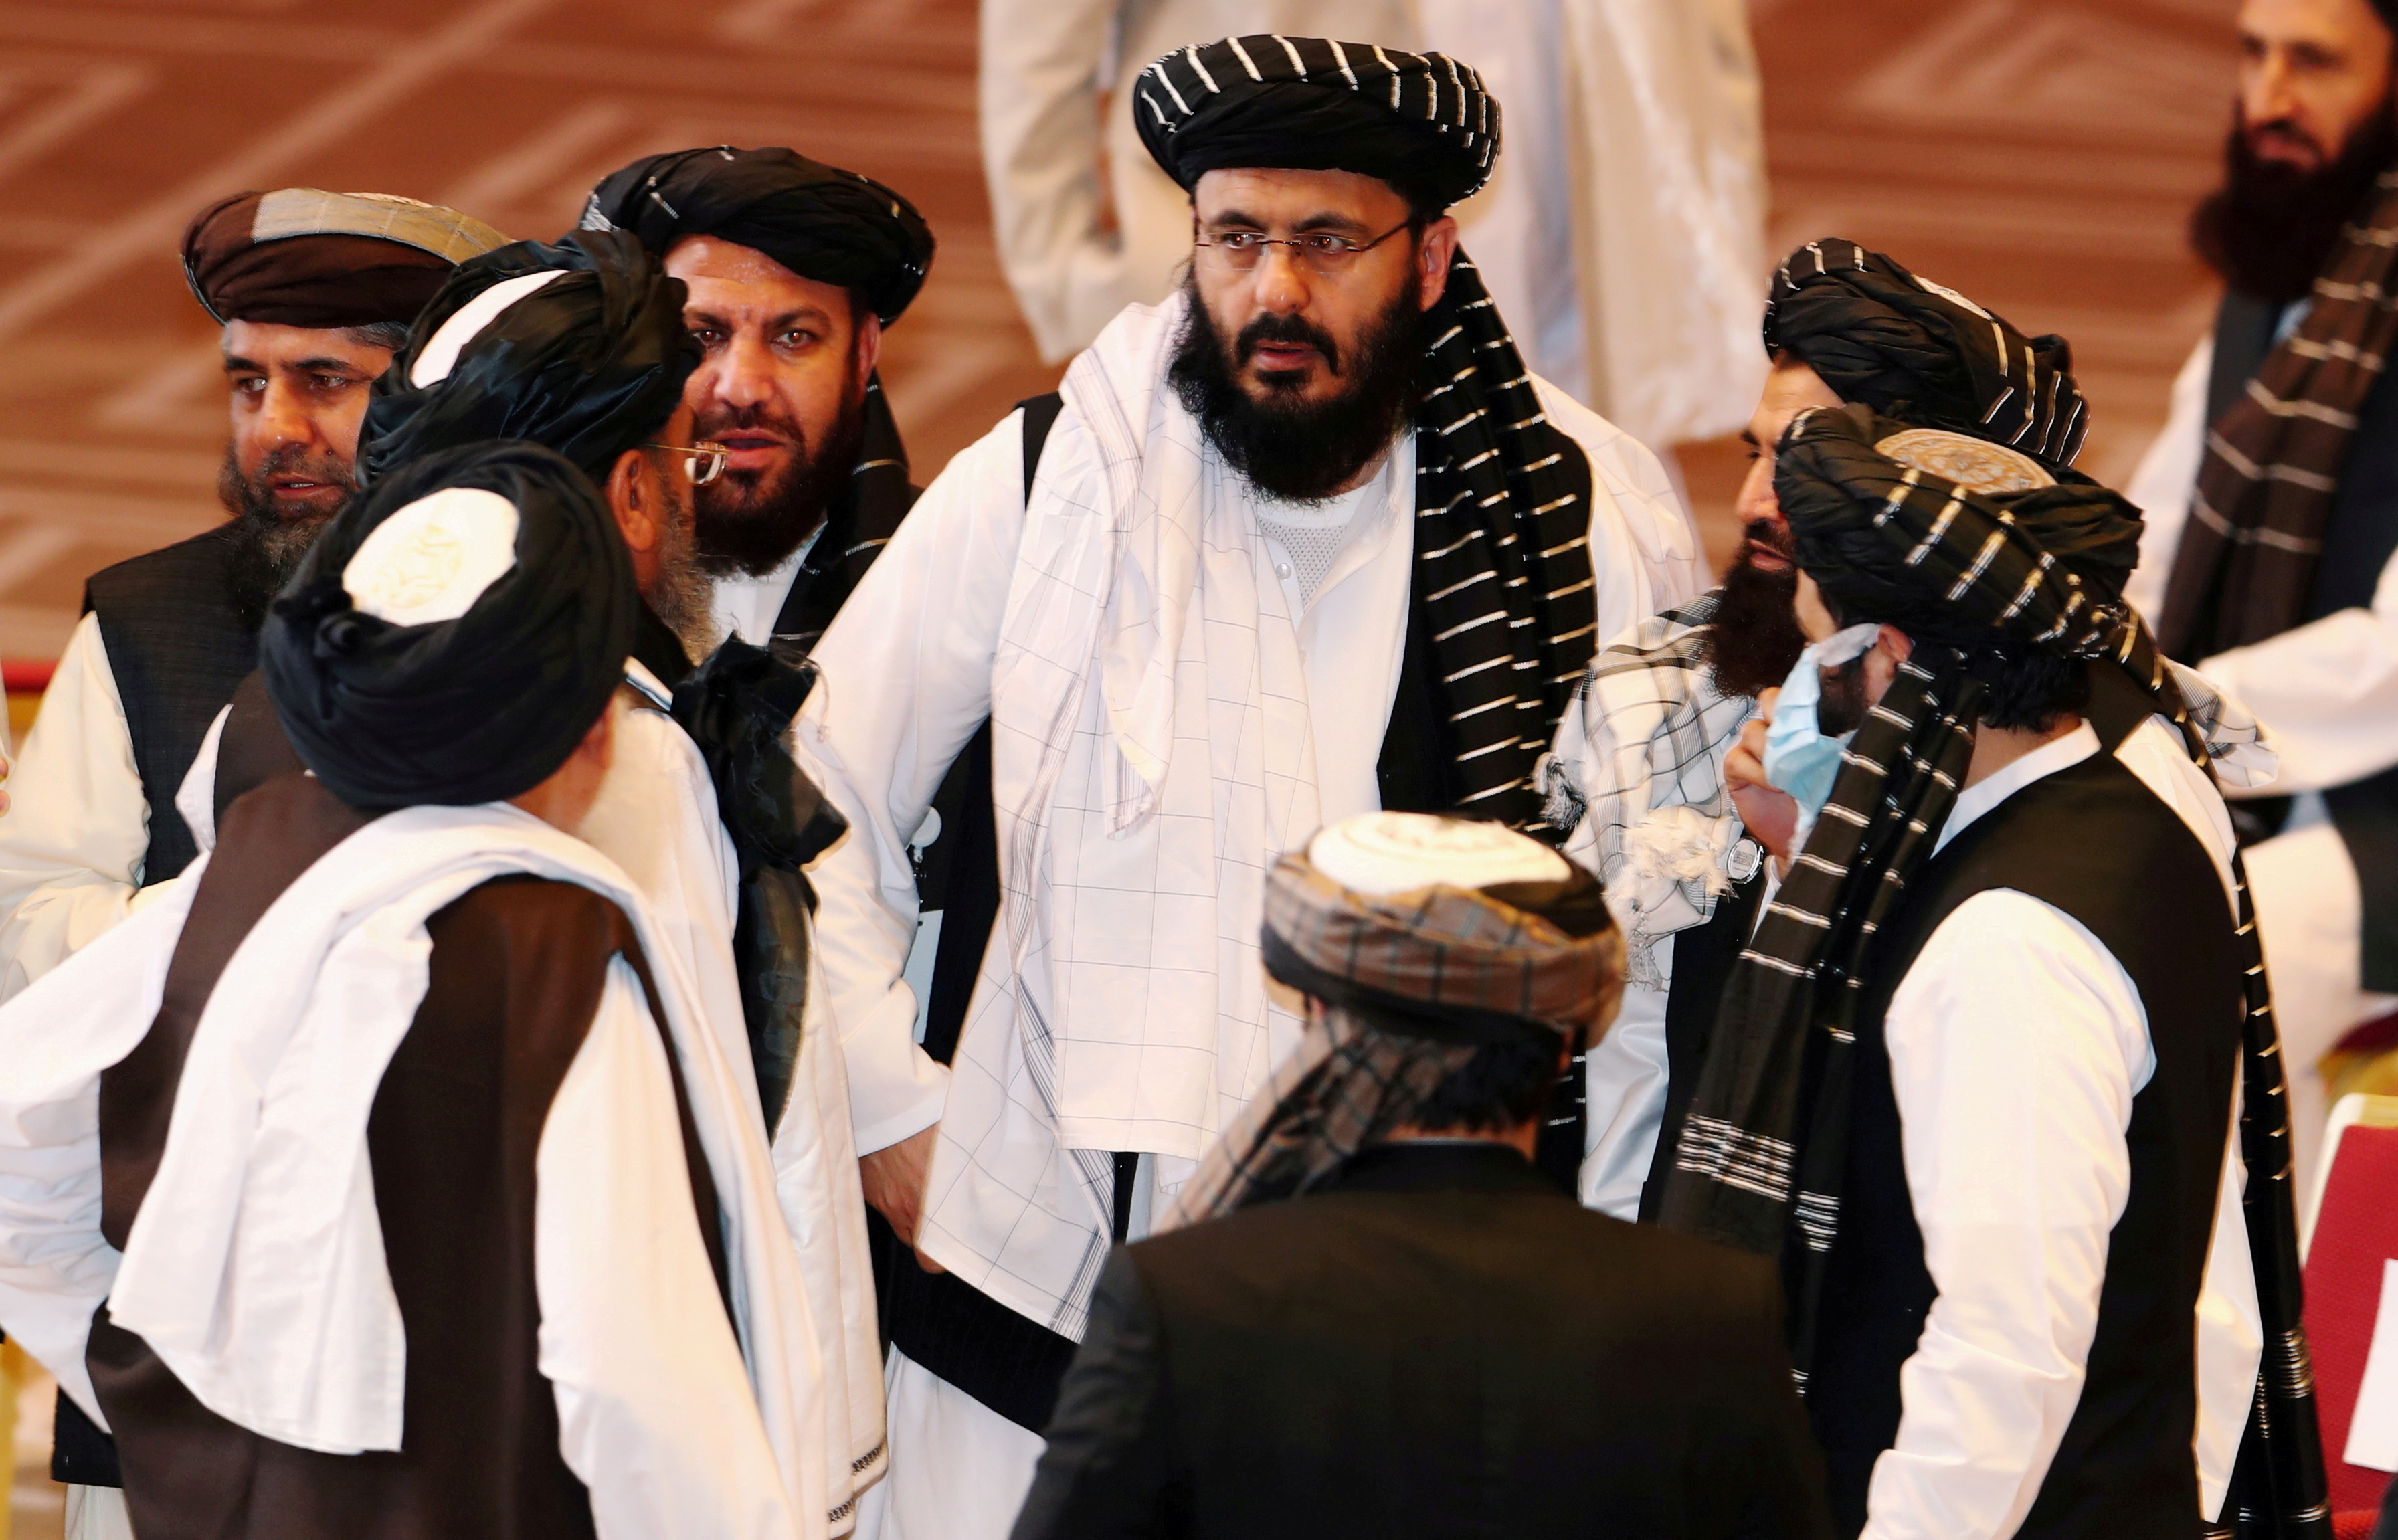 Taliban delegates speak during talks between the Afghan government and Taliban insurgents in Doha, Qatar